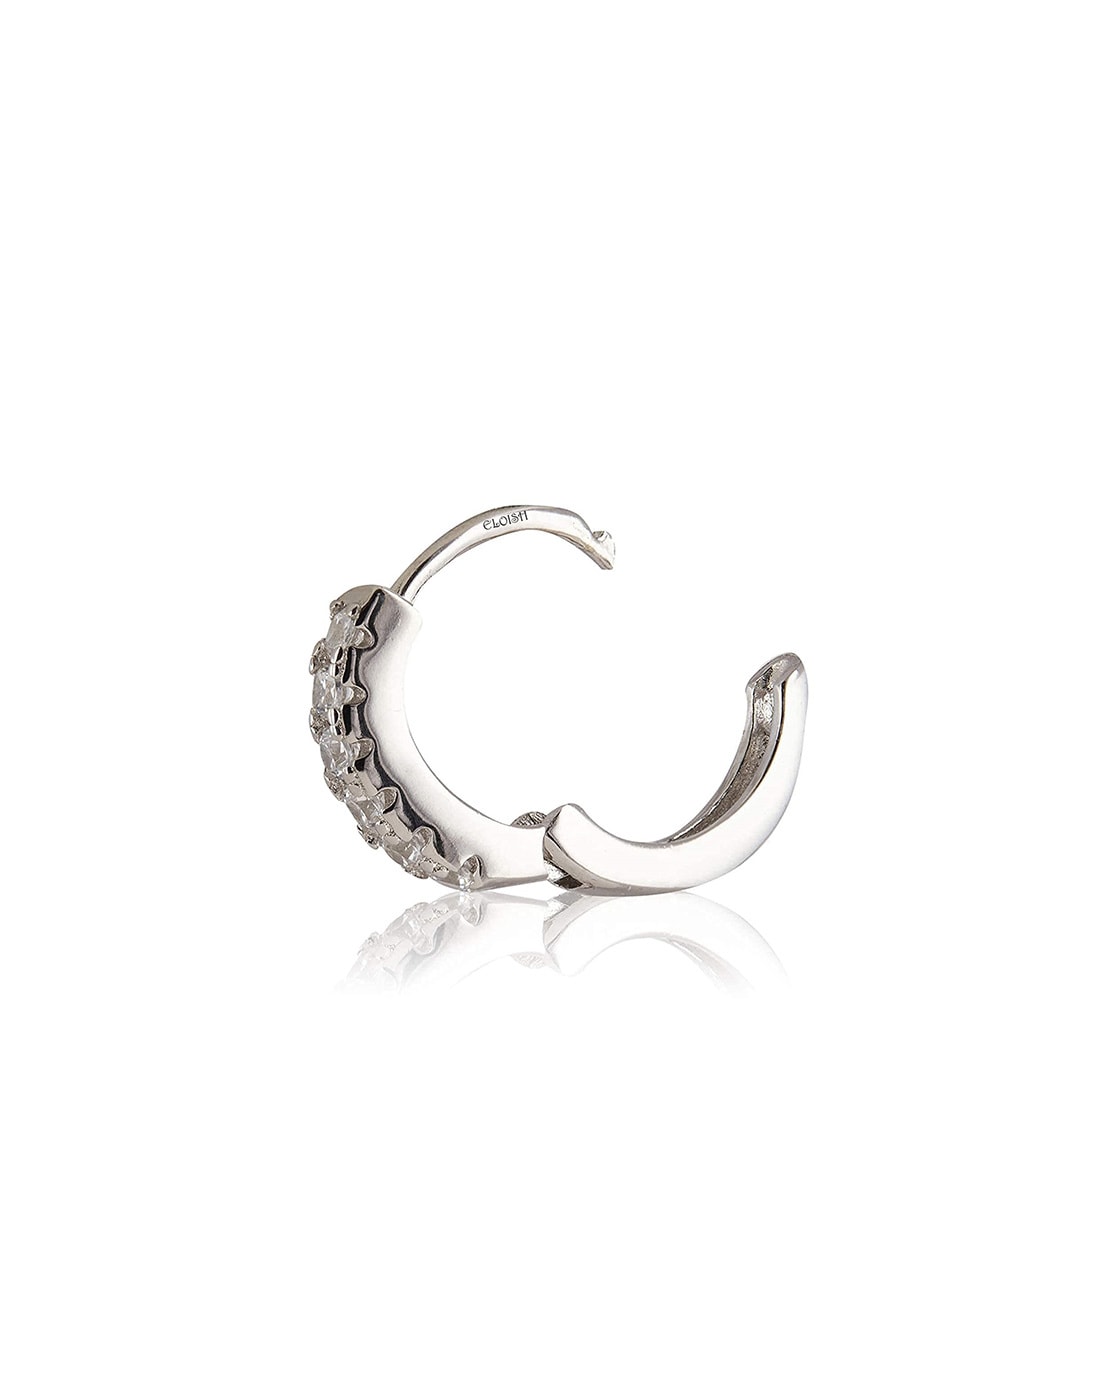 Amazon.com: Tiny Silver Nose Piericng Hoop - Thin Hypoallergenic 7mm Nose  Ring - Handmade 925 Sterling Silver 20 Gauge Nose Hoop Jewelry : Handmade  Products